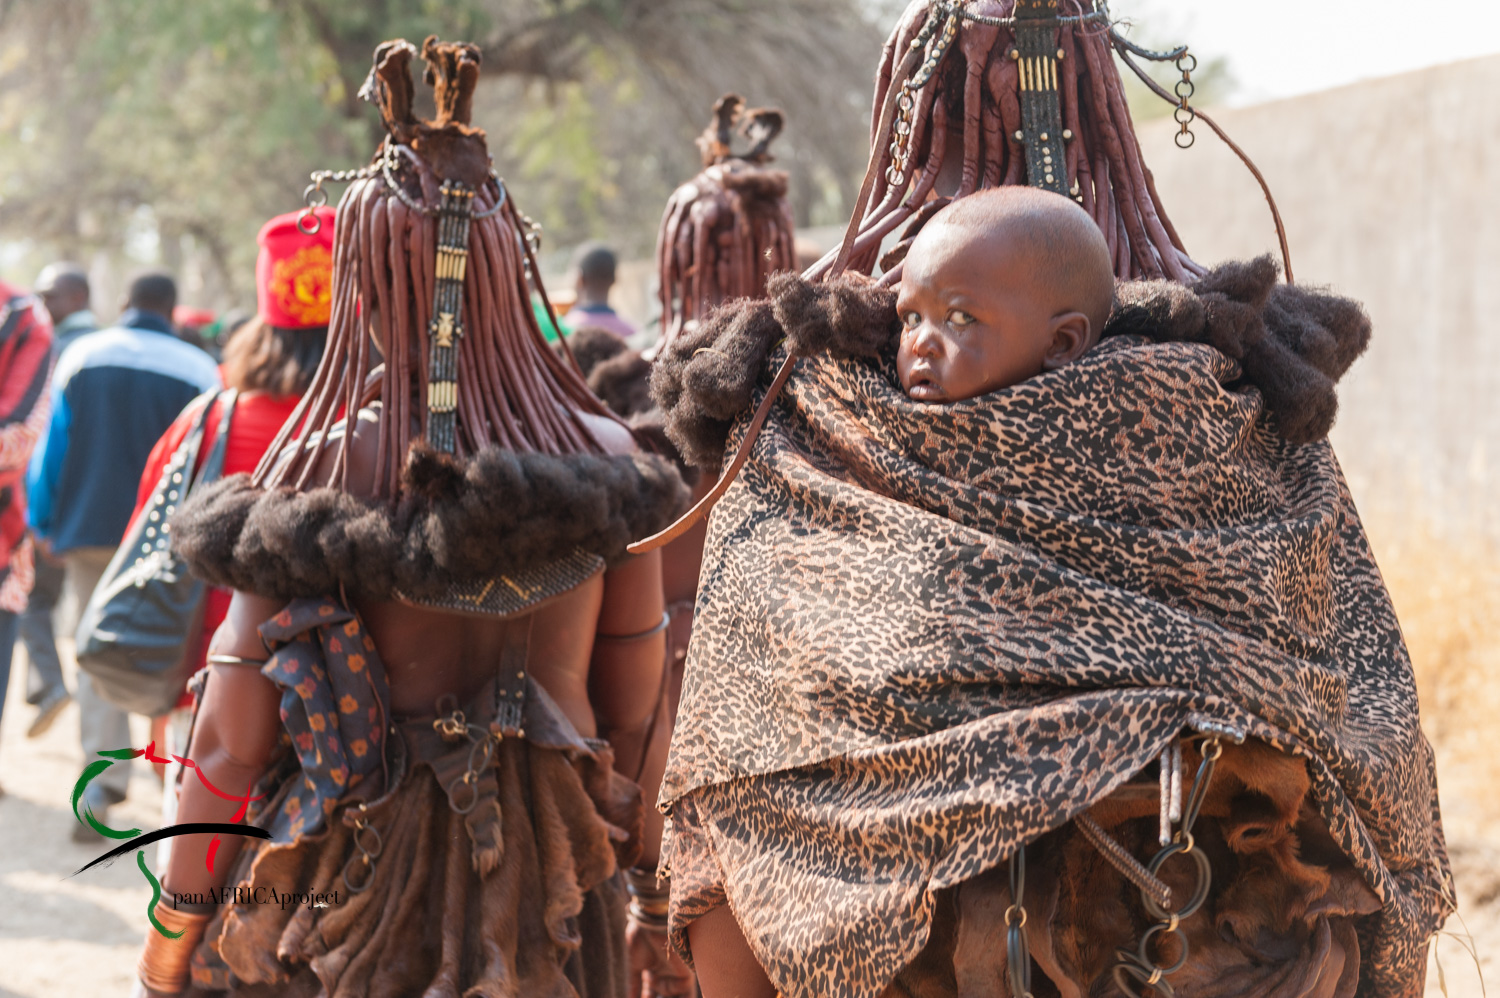 A child being carried on the back of a Himba woman